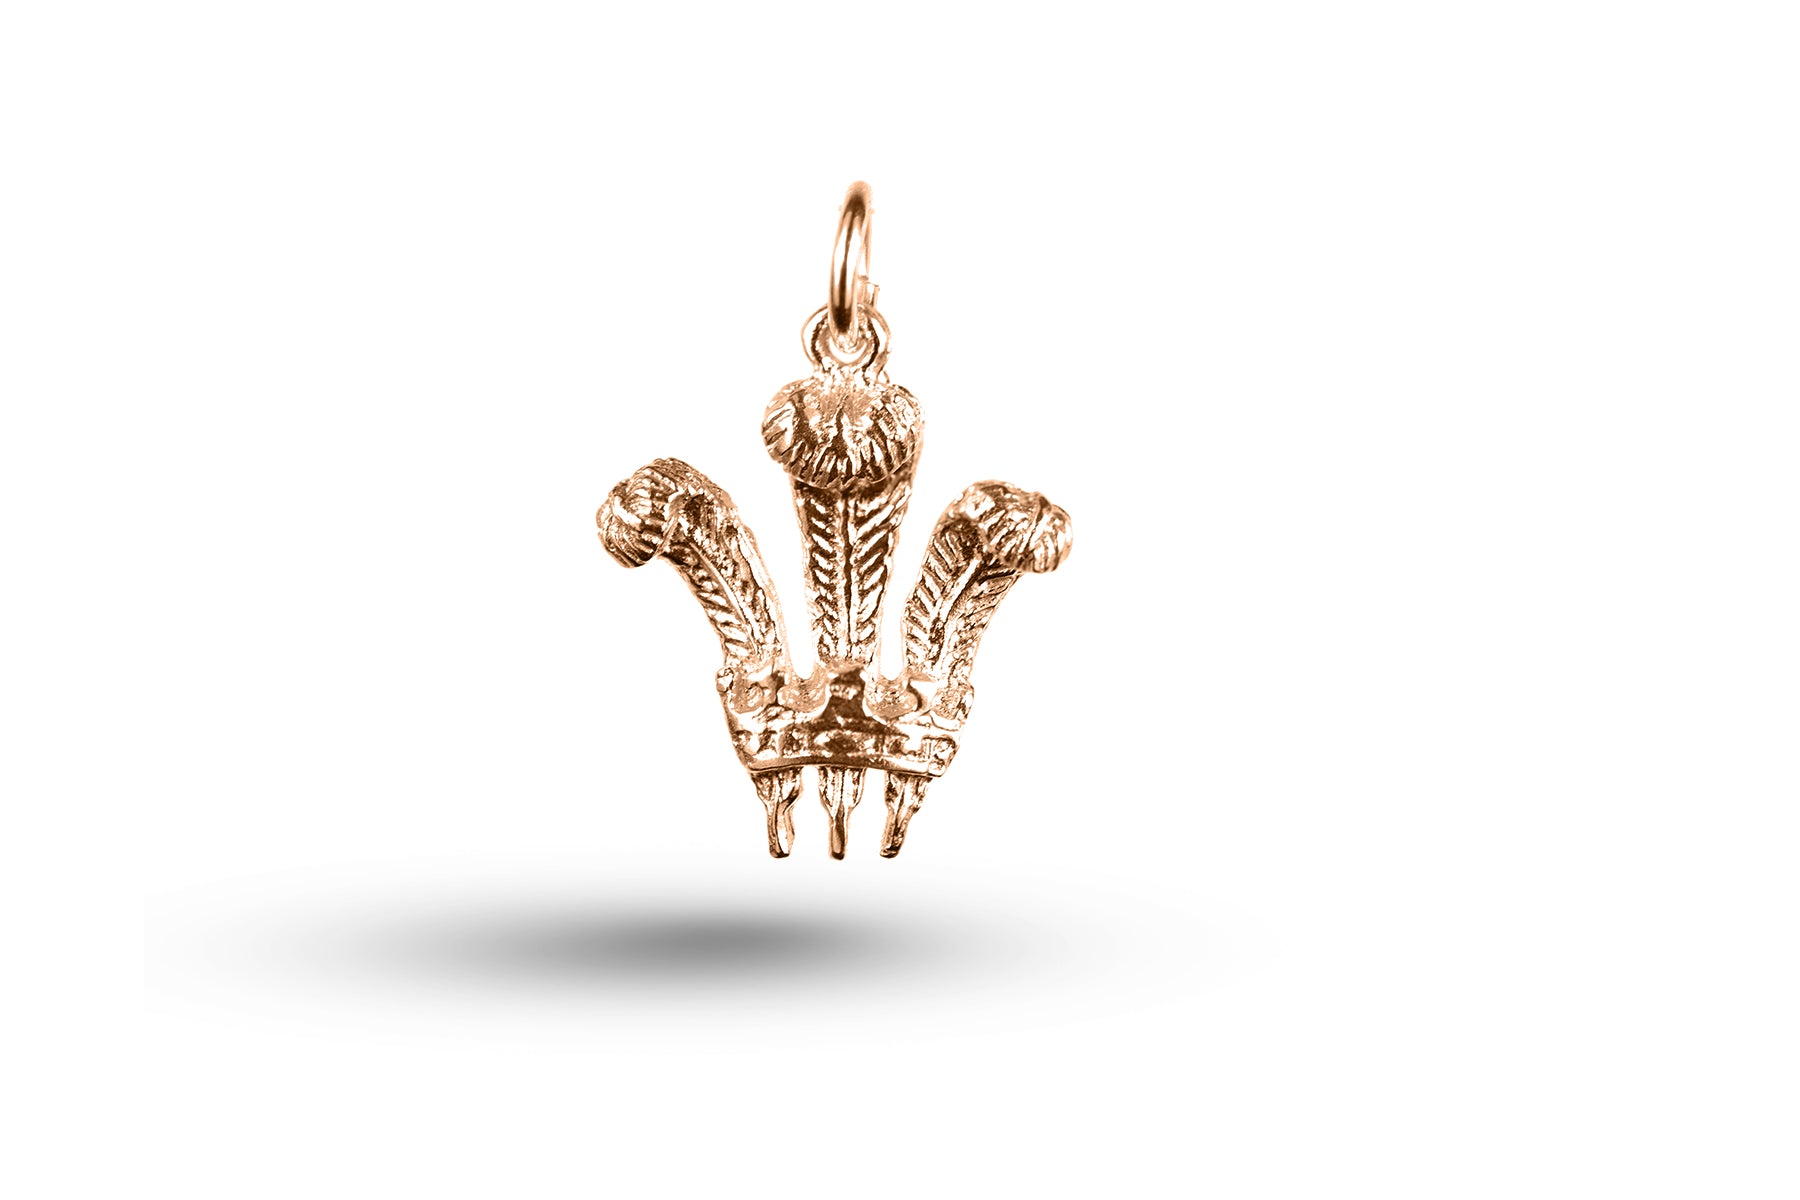 Rose gold Prince of Wales Feathers charm.